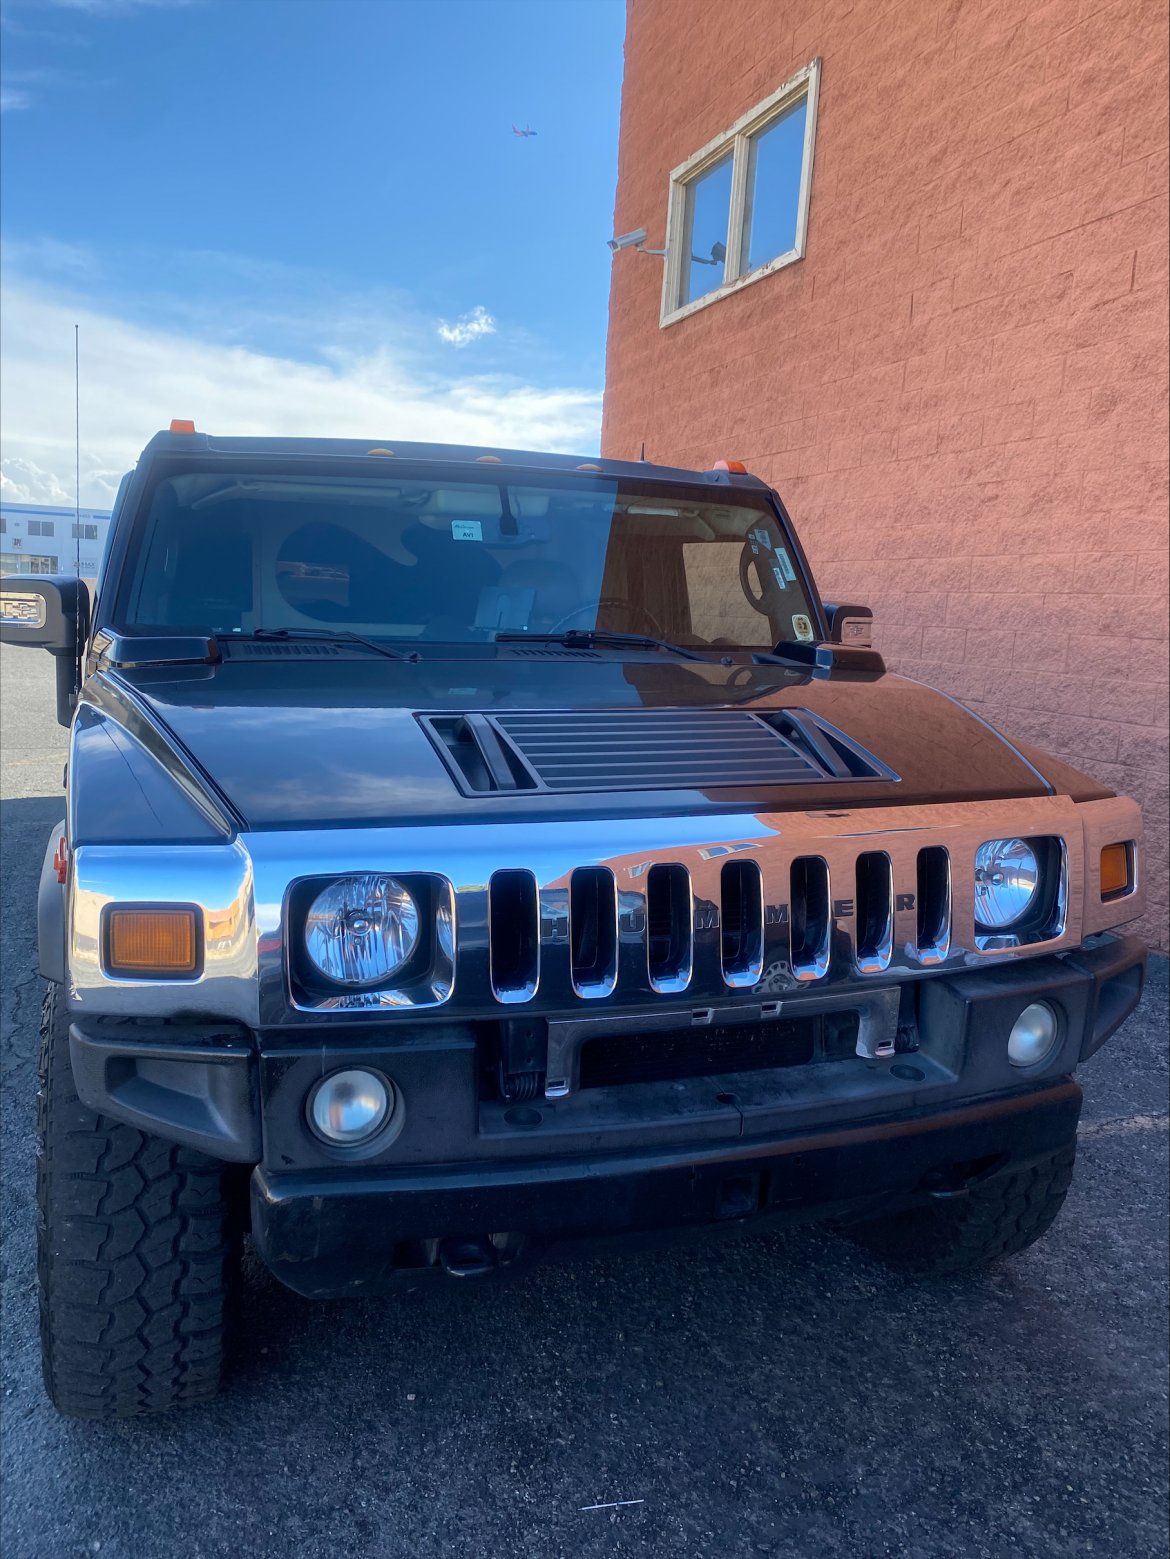 SUV Stretch for sale: 2006 Hummer H2